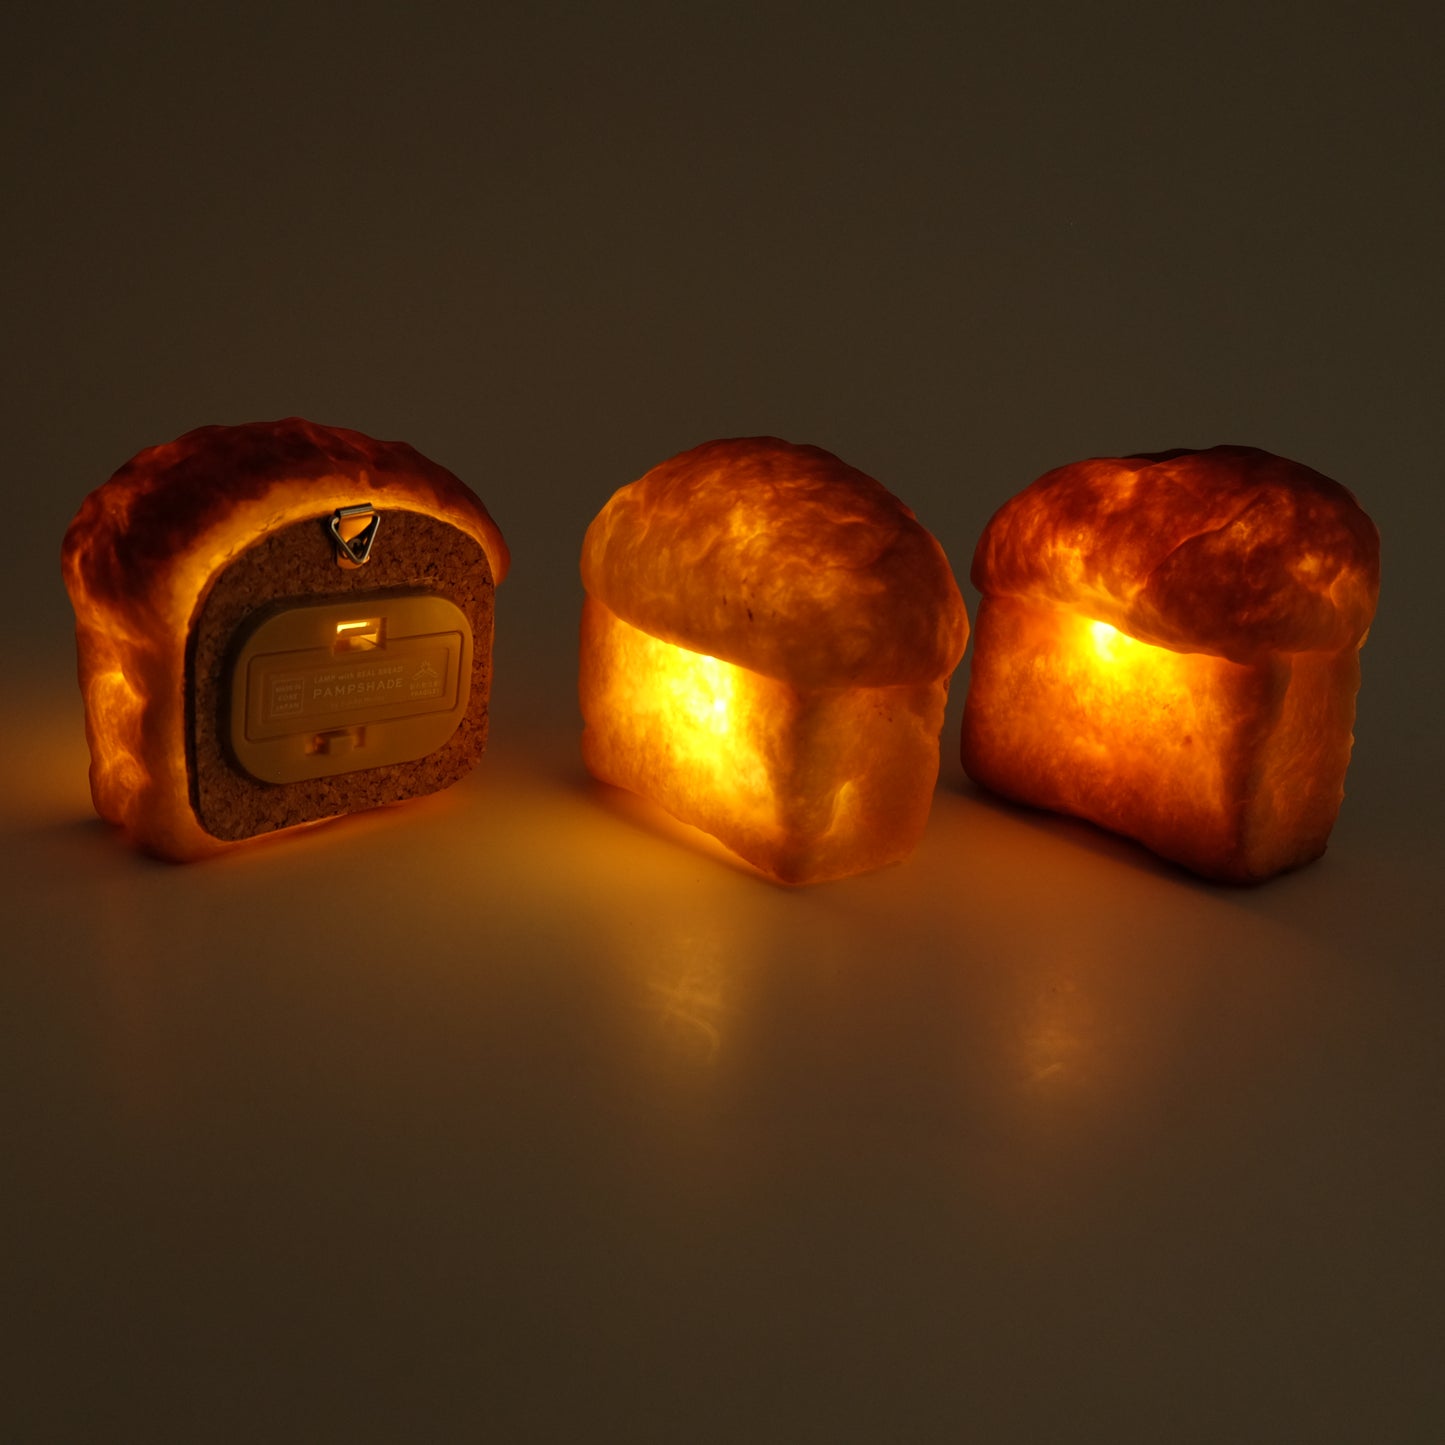 Amamdacotan x Pampshade Mini loaf Bread Lamp D-2 (Battery Powered LED Light)